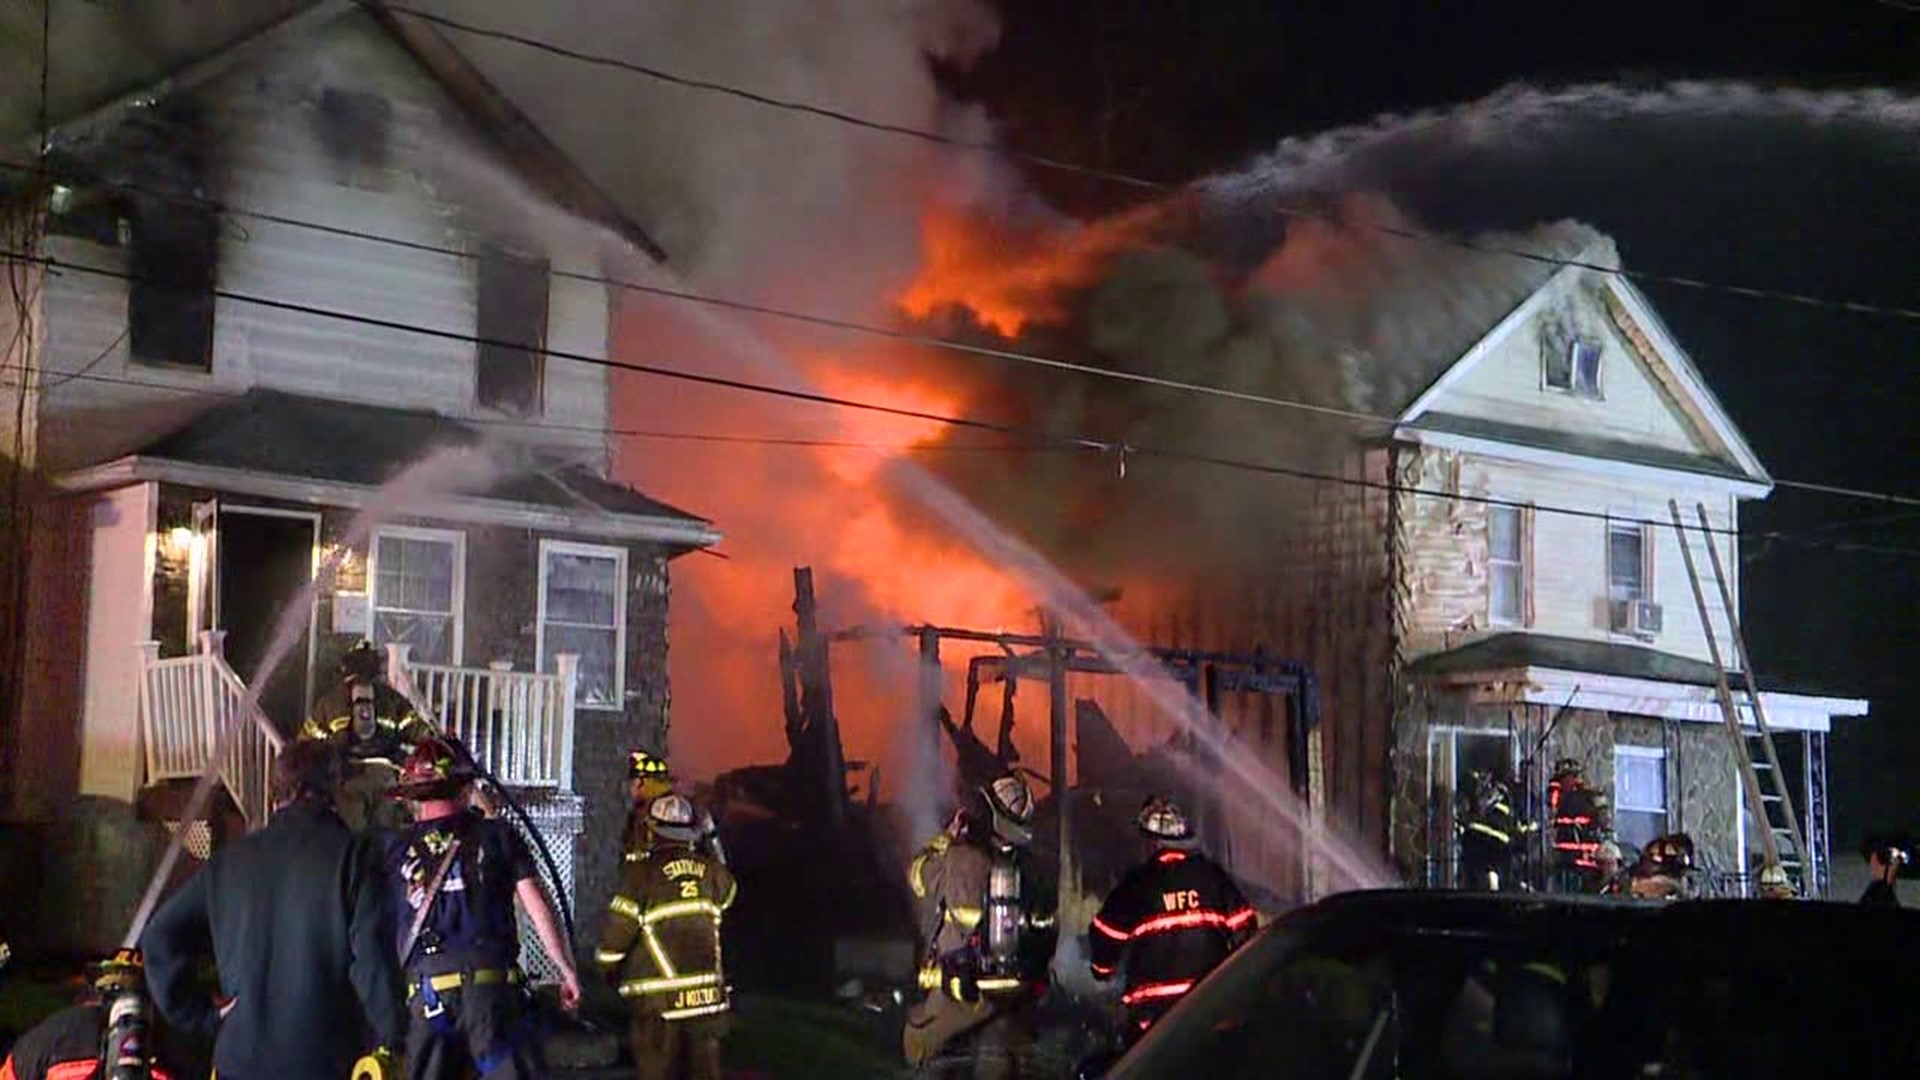 Flames broke out around 10 p.m. along the 600 block of 4th Avenue in Jessup Saturday night.